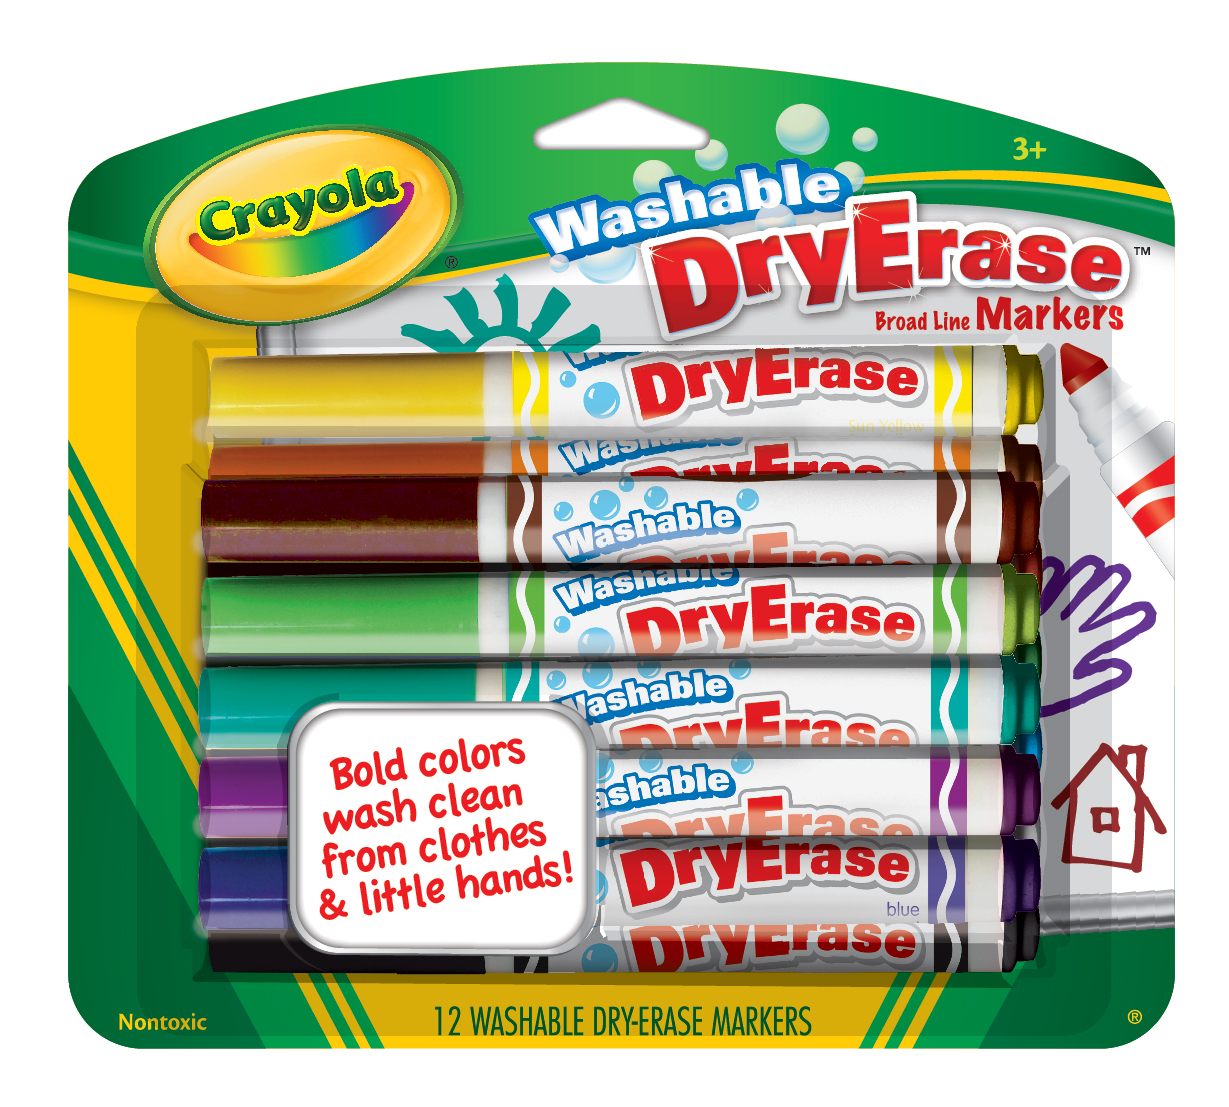 Download Washable Dry-Erase Broad Line Markers, 12 Count | Crayola